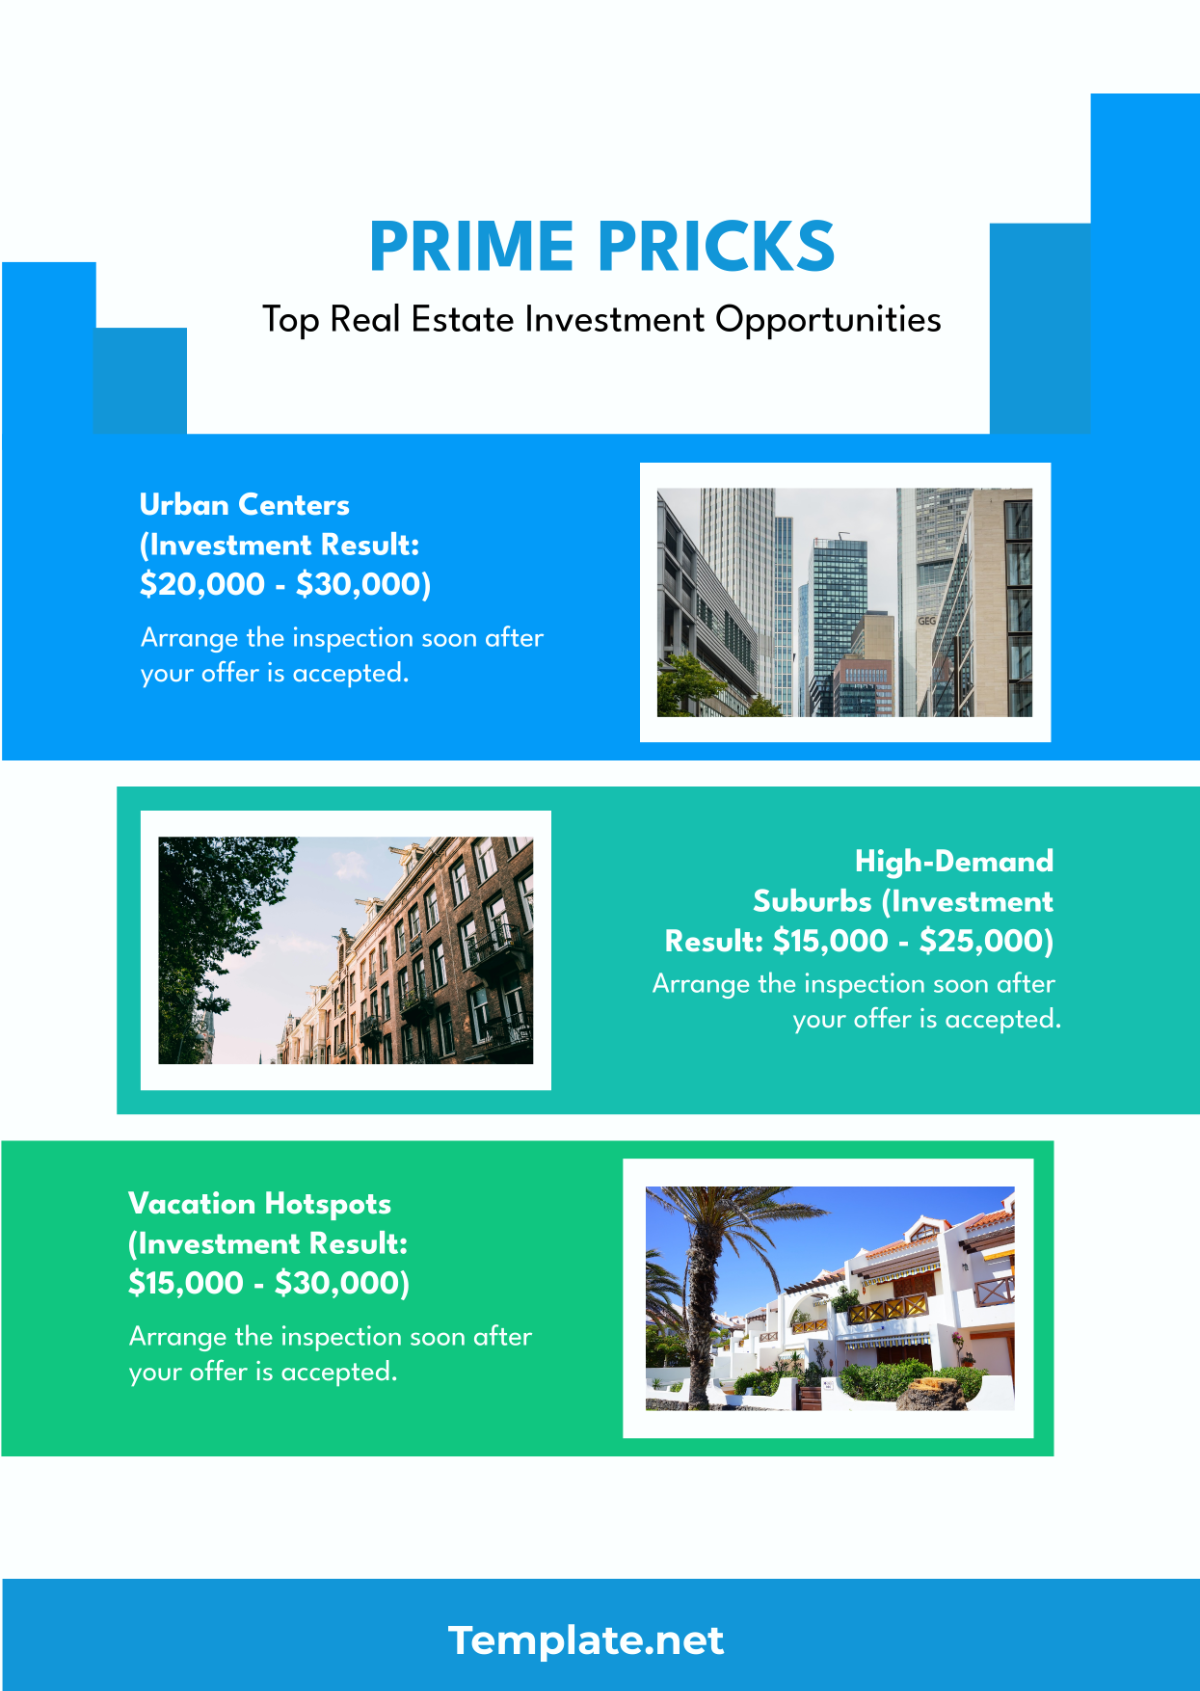 Real Estate Best Places To Invest Infographic